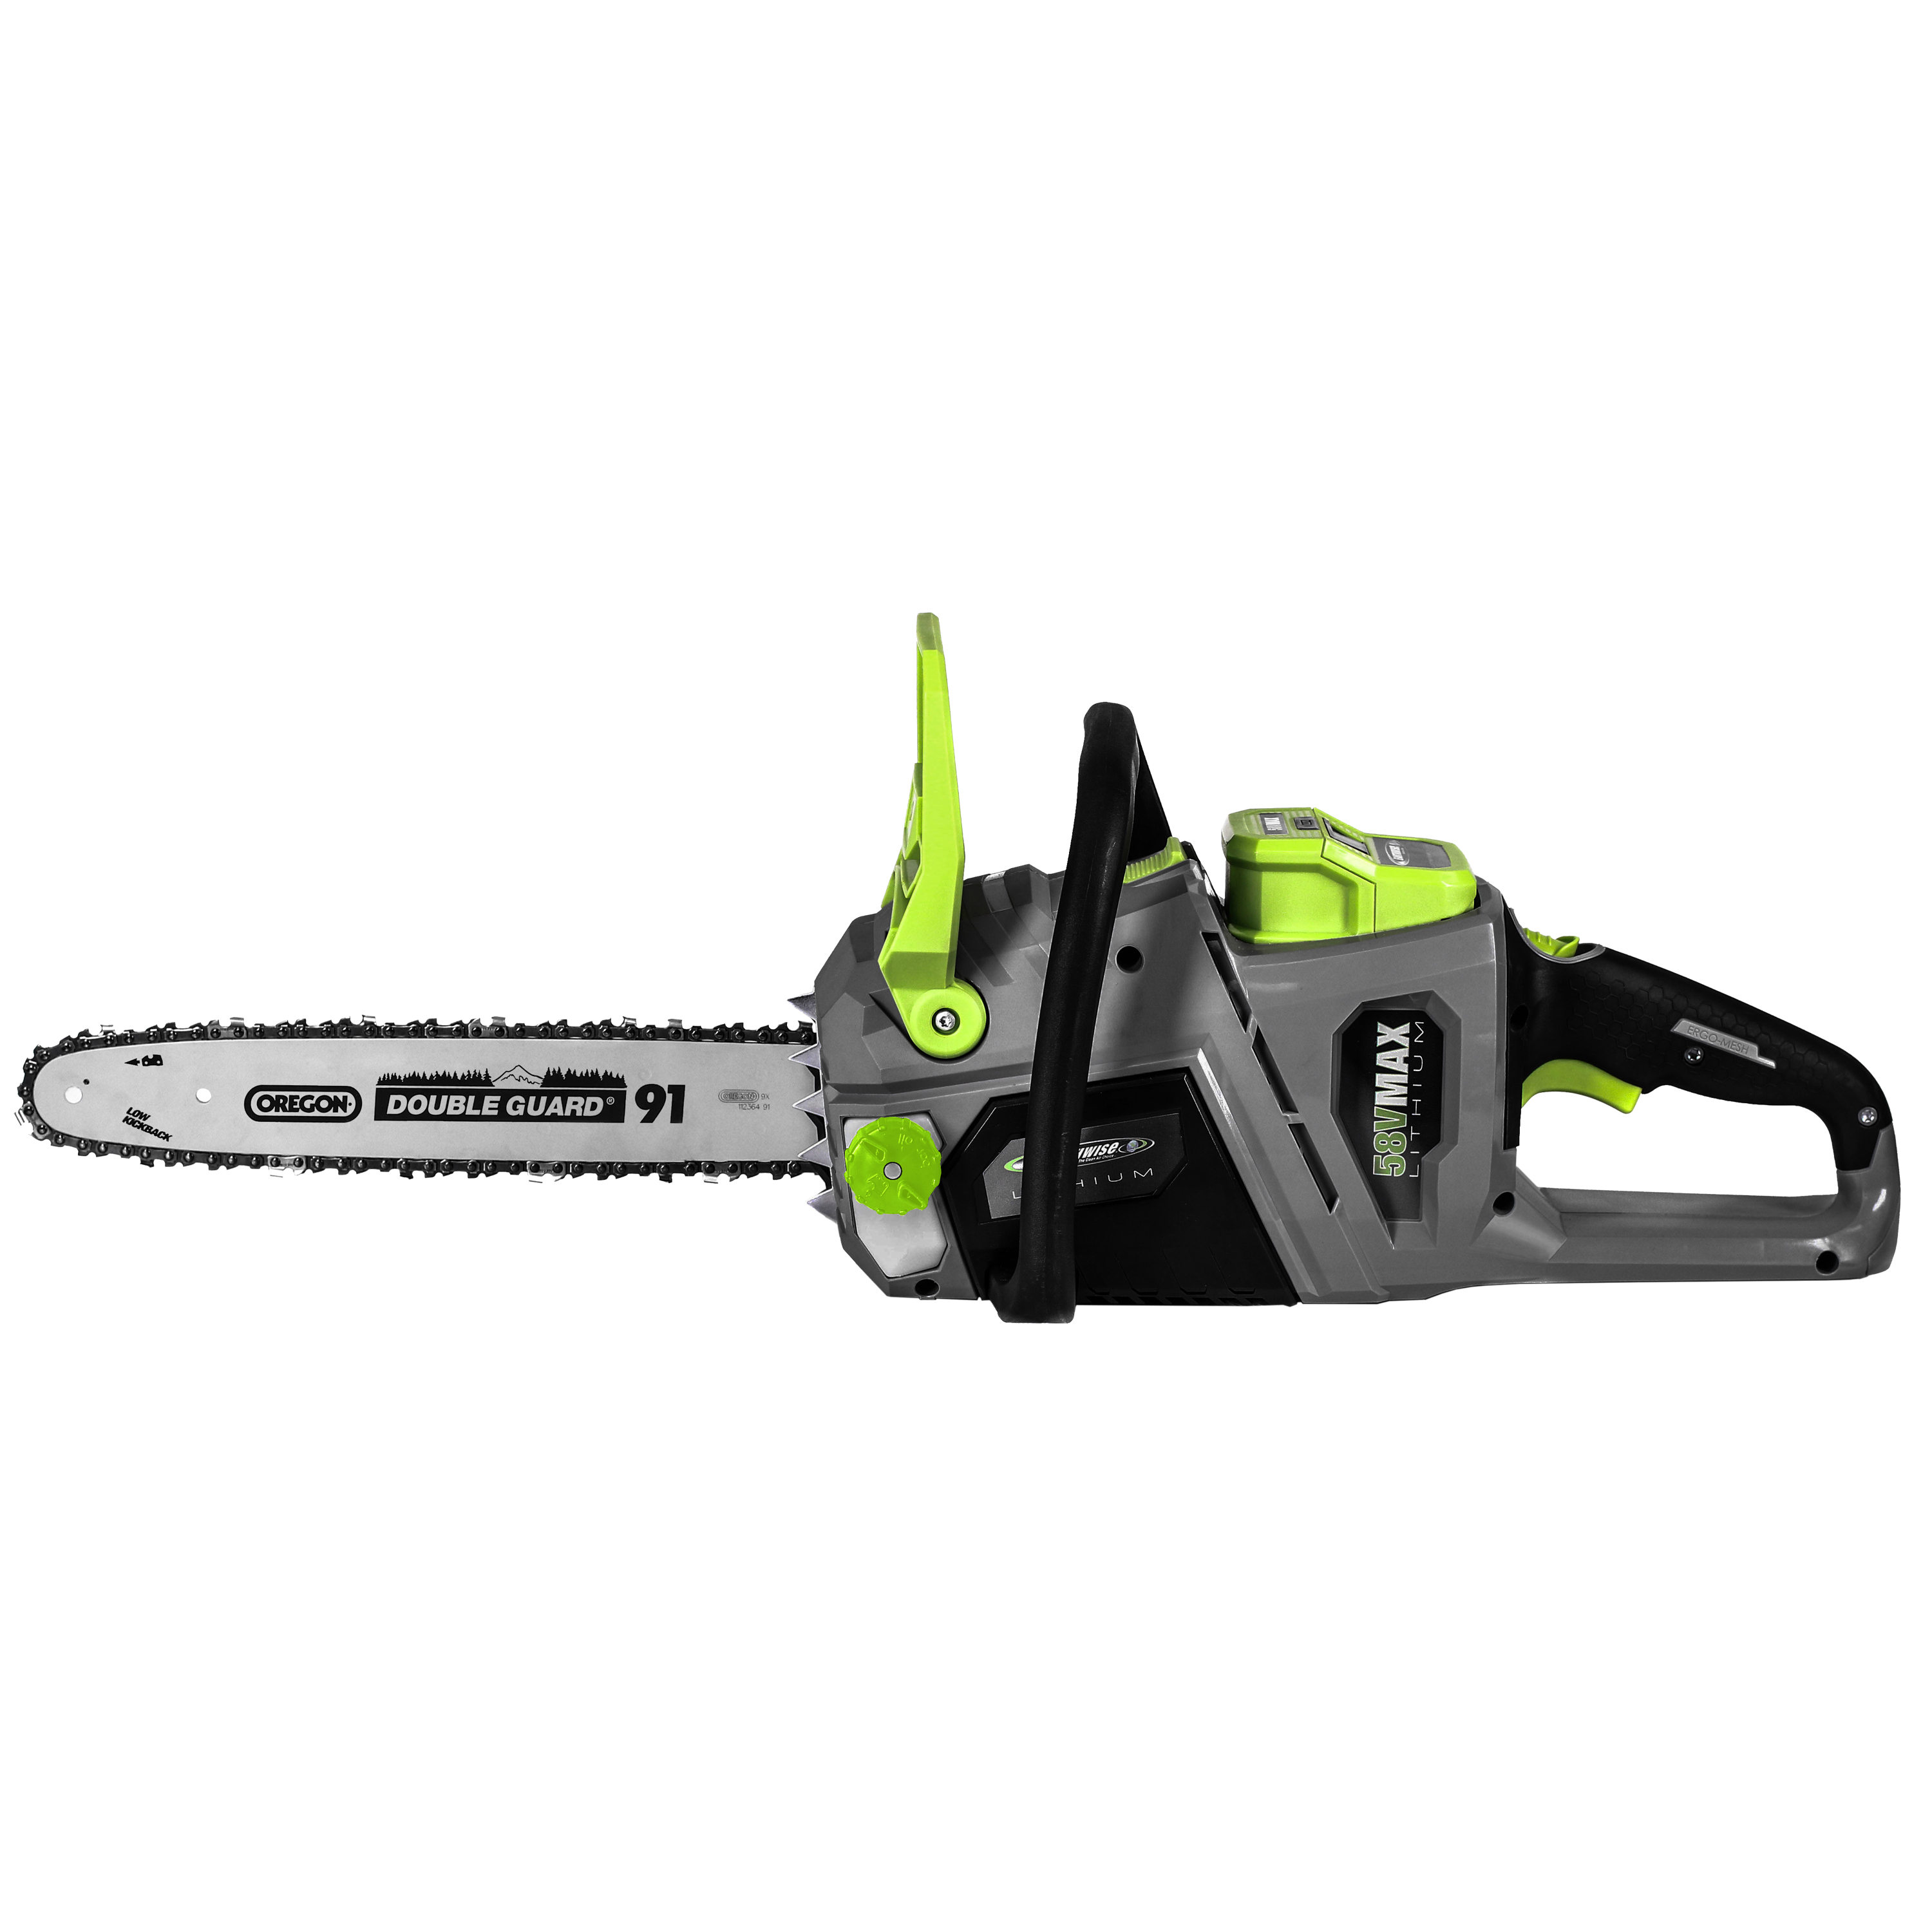 Earthwise LCS35814 14" 58-Volt Cordless Chainsaw, Brushless Motor (2Ah Battery and Charger Included) - image 3 of 5